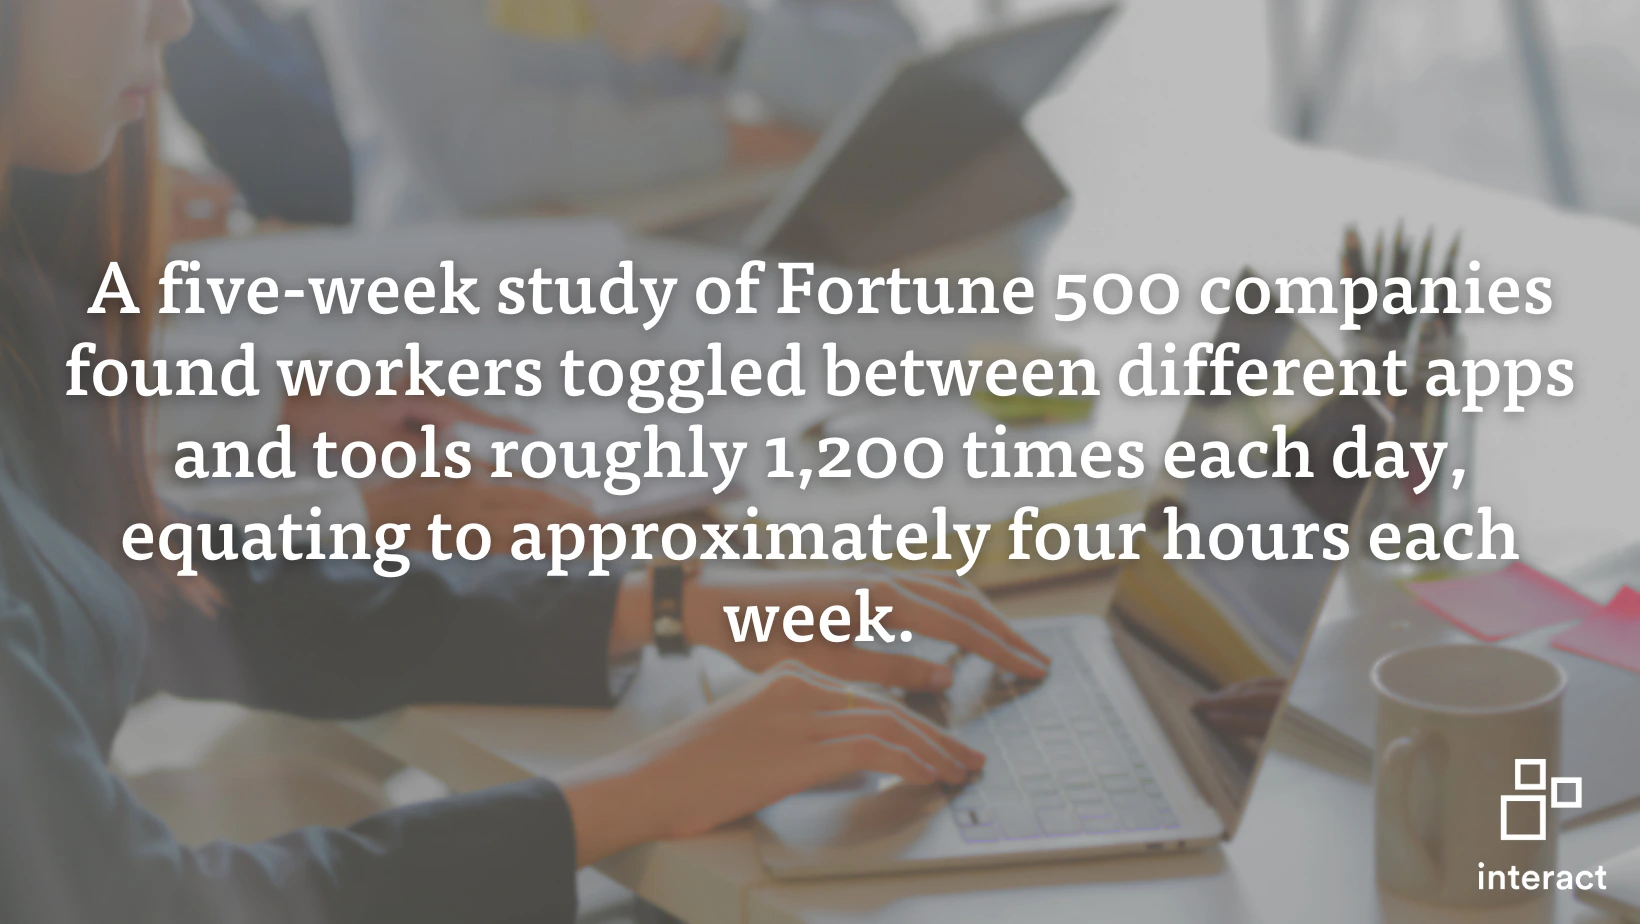 A quote image about a study where employees in Fortune 500 organizations were found to spend four hours a week navigating between different apps and tools, which highlights why optimizing technology for productivity matters.